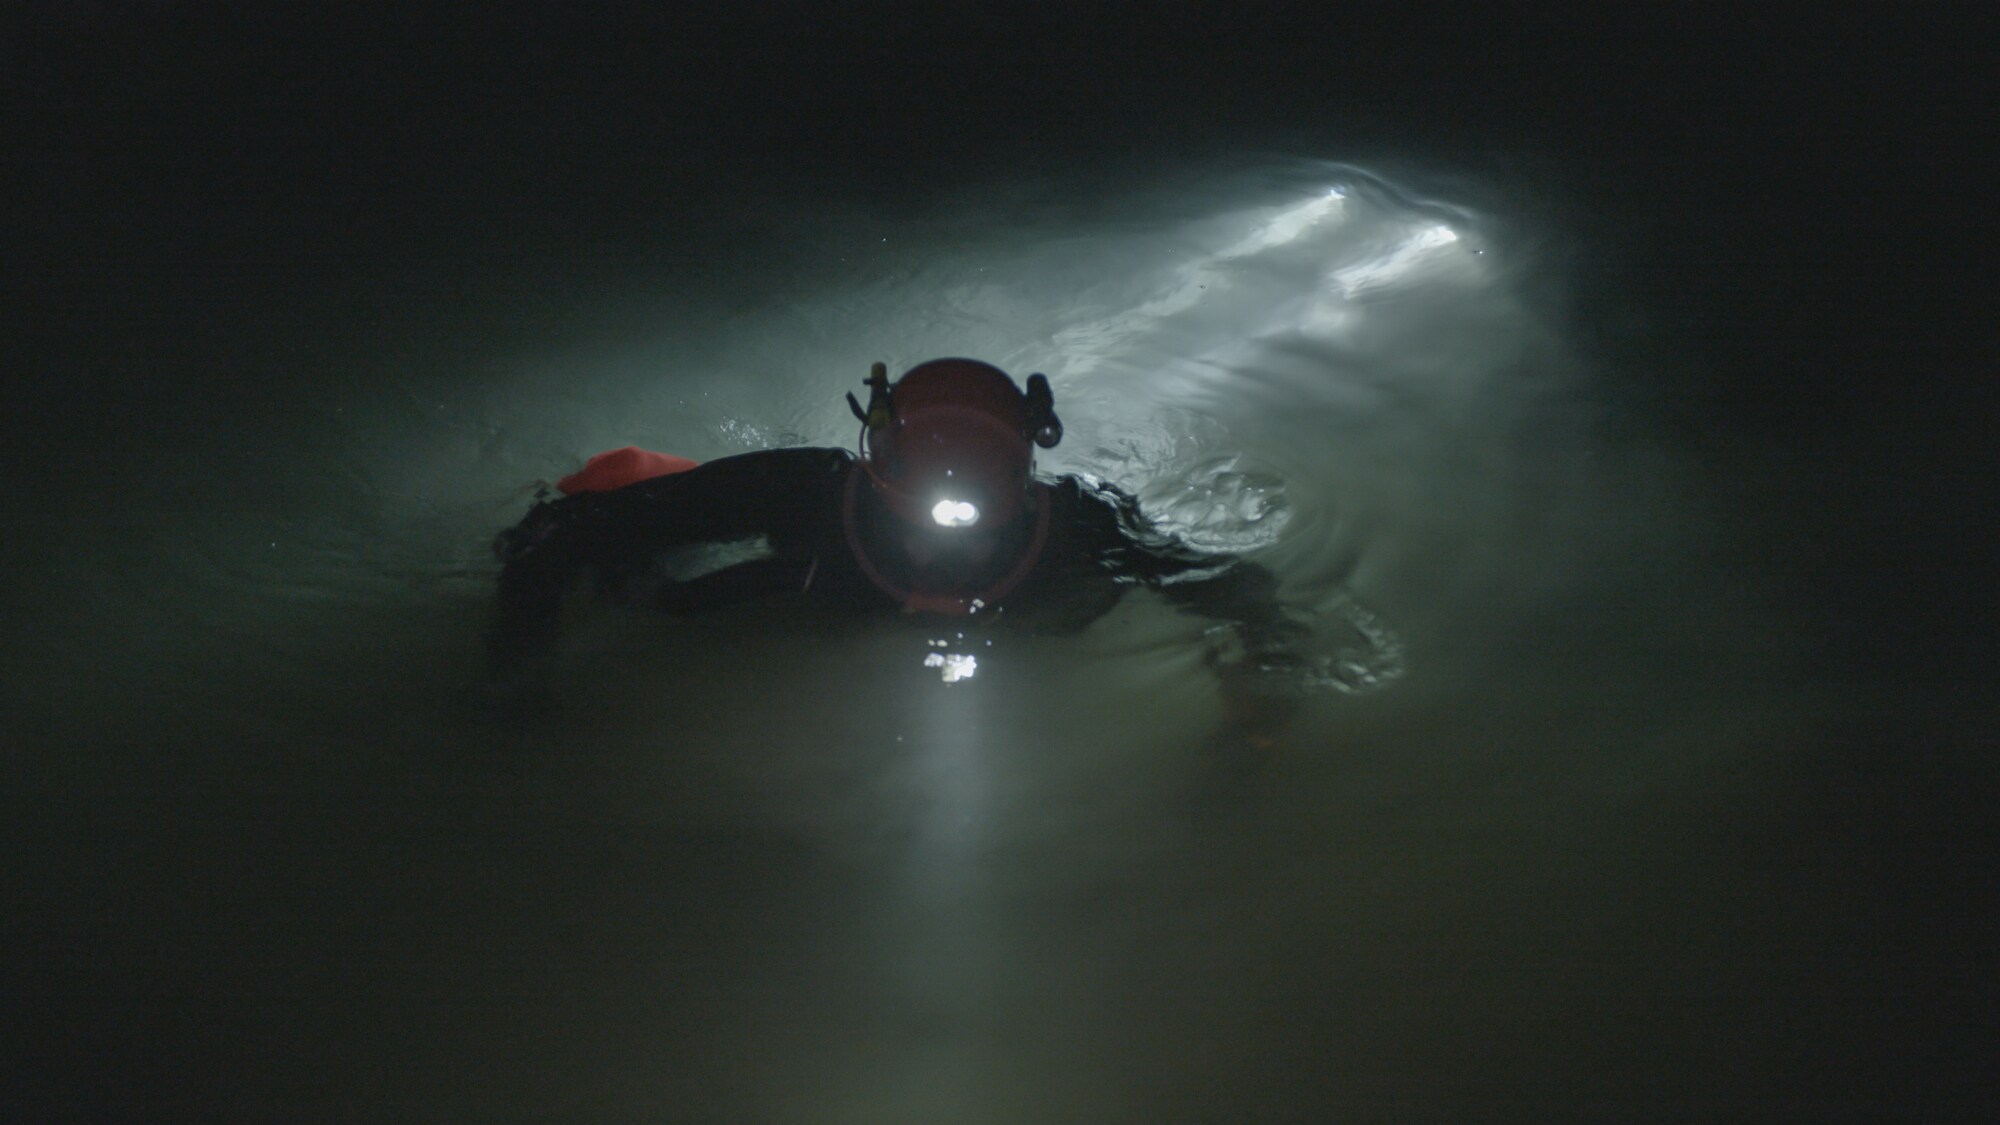 Cave diver emerges from water.  THE RESCUE chronicles the 2018 rescue of 12 Thai boys and their soccer coach, trapped deep inside a flooded cave. E. Chai Vasarhelyi and Jimmy Chin reveal the perilous world of cave diving, bravery of the rescuers, and dedication of a community that made great sacrifices to save these young boys. (Credit: National Geographic)